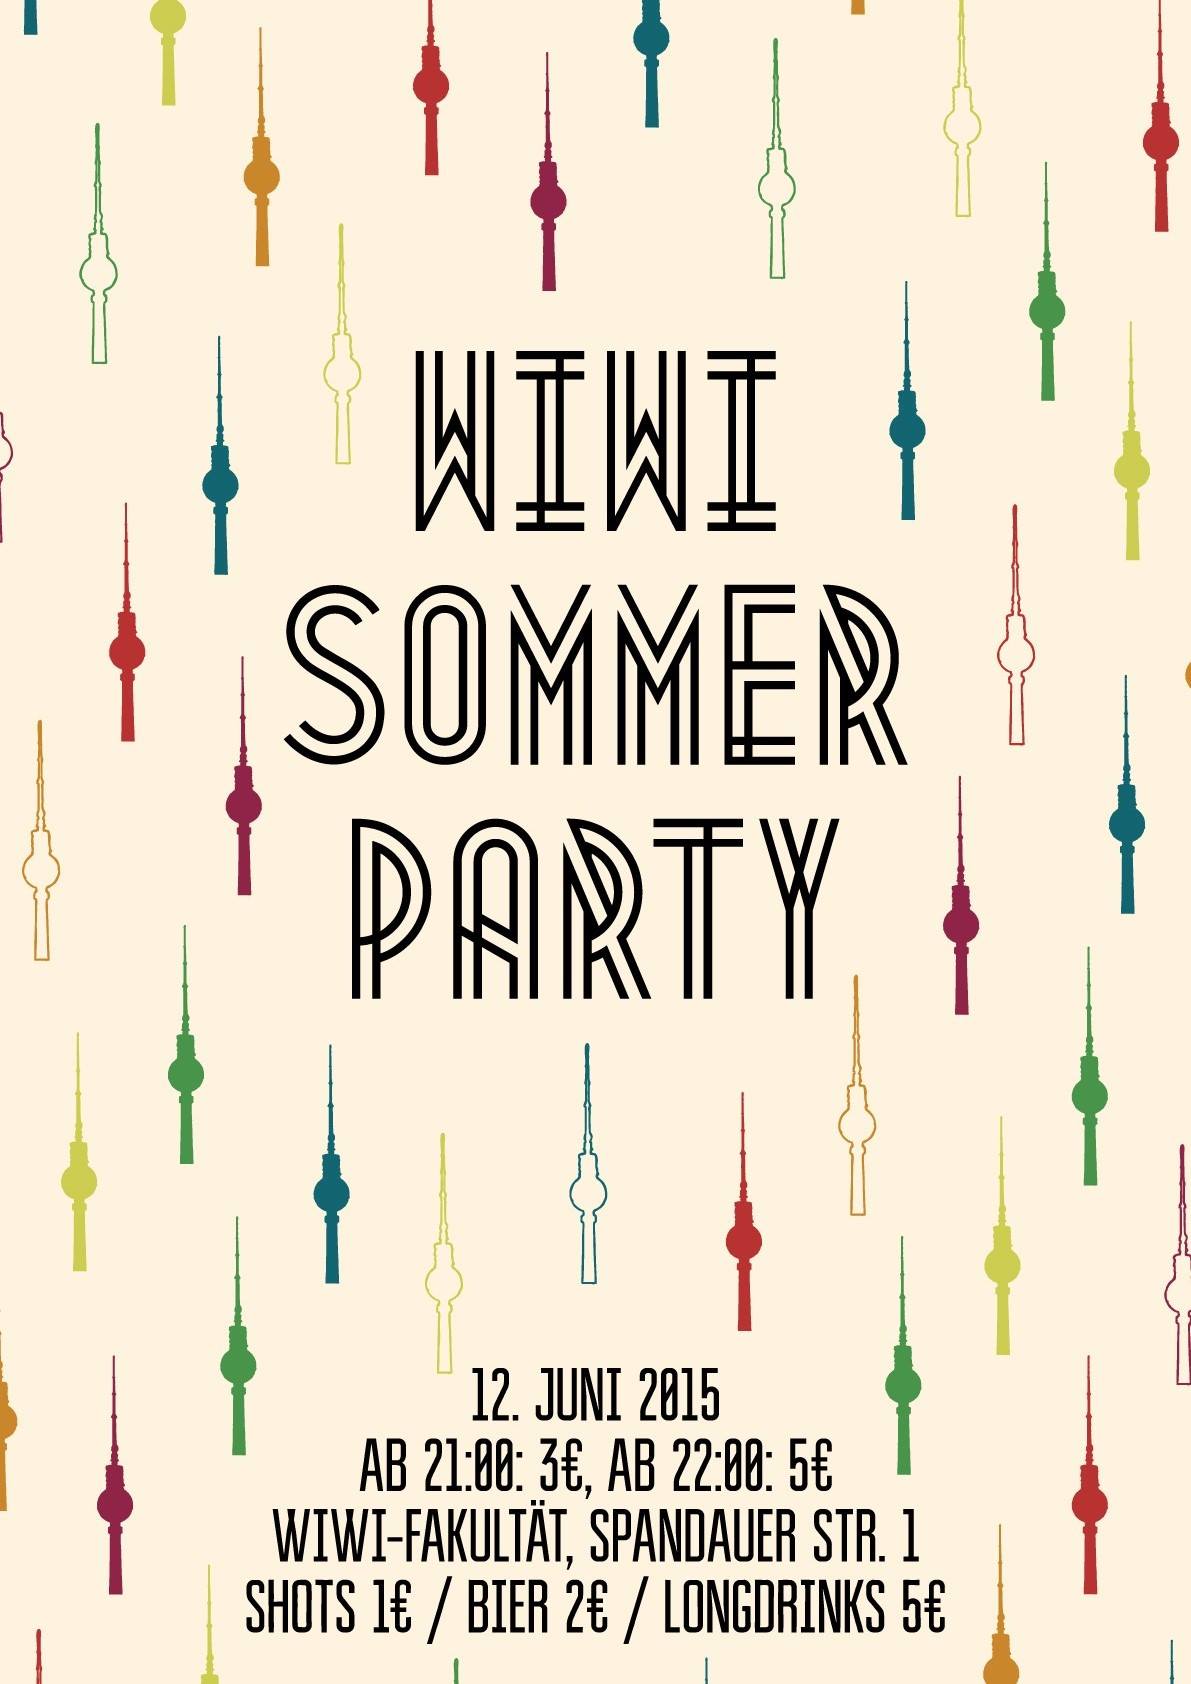 Sommer Party 2015